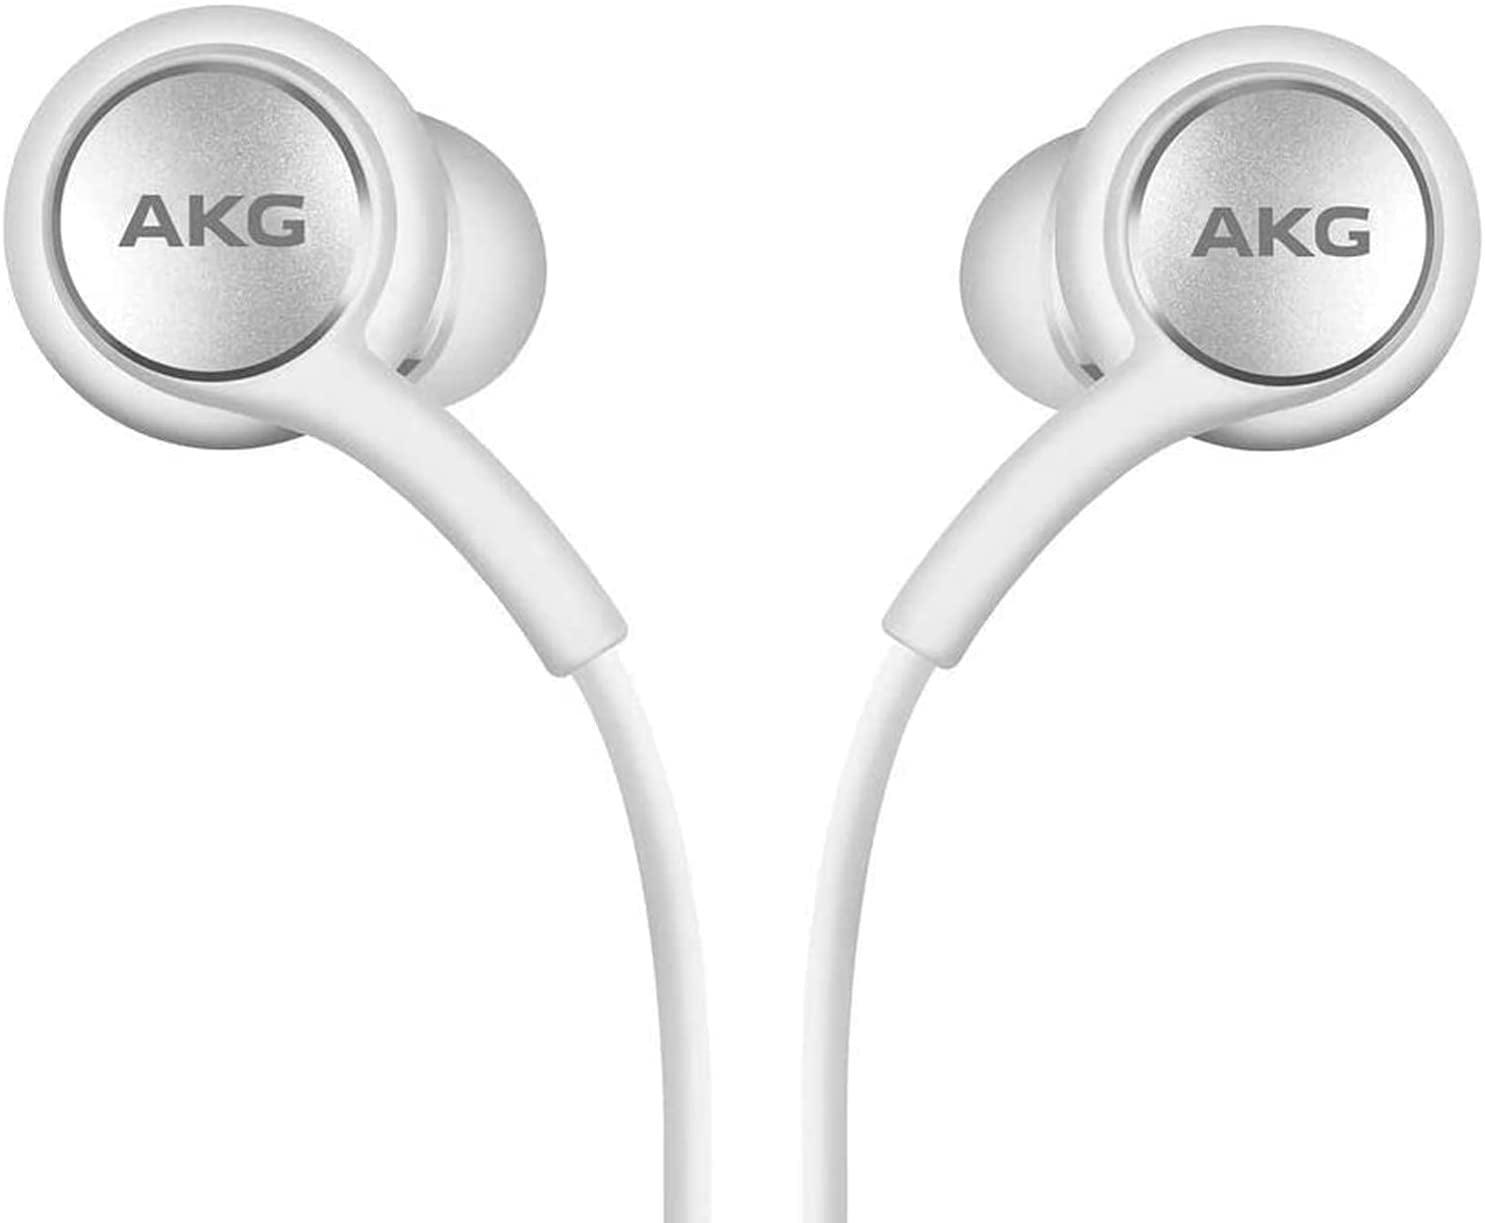 Sea bream Hollow Basket Earbuds USB C Headphones for Samsung Galaxy S9 - Designed by AKG - Braided  Cable with Microphone and Volume Remote Type-C Connector - White -  Walmart.com